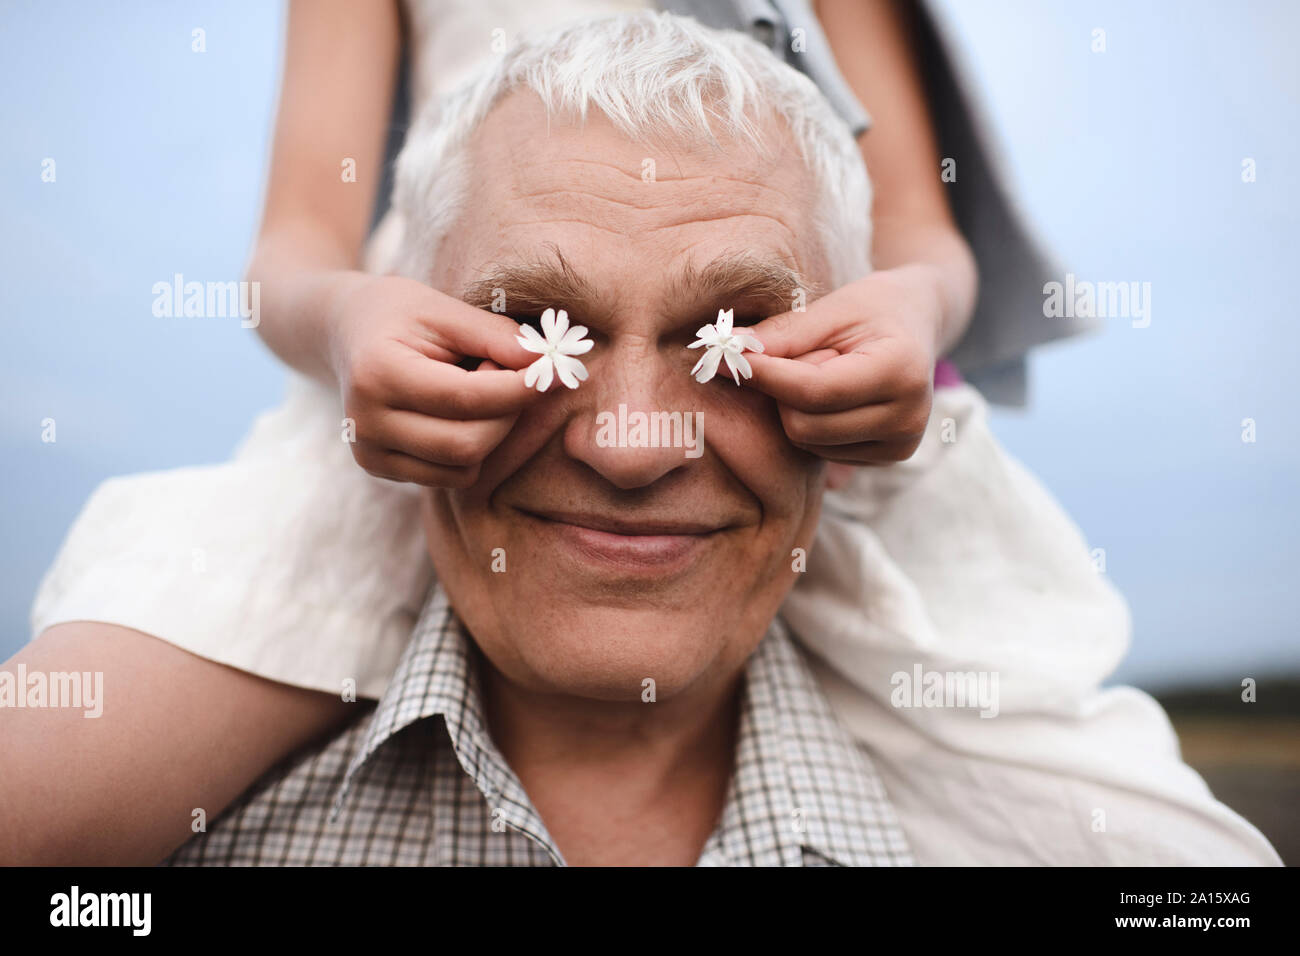 Hands of little girl covering eyes of her grandfather with white blossoms Stock Photo